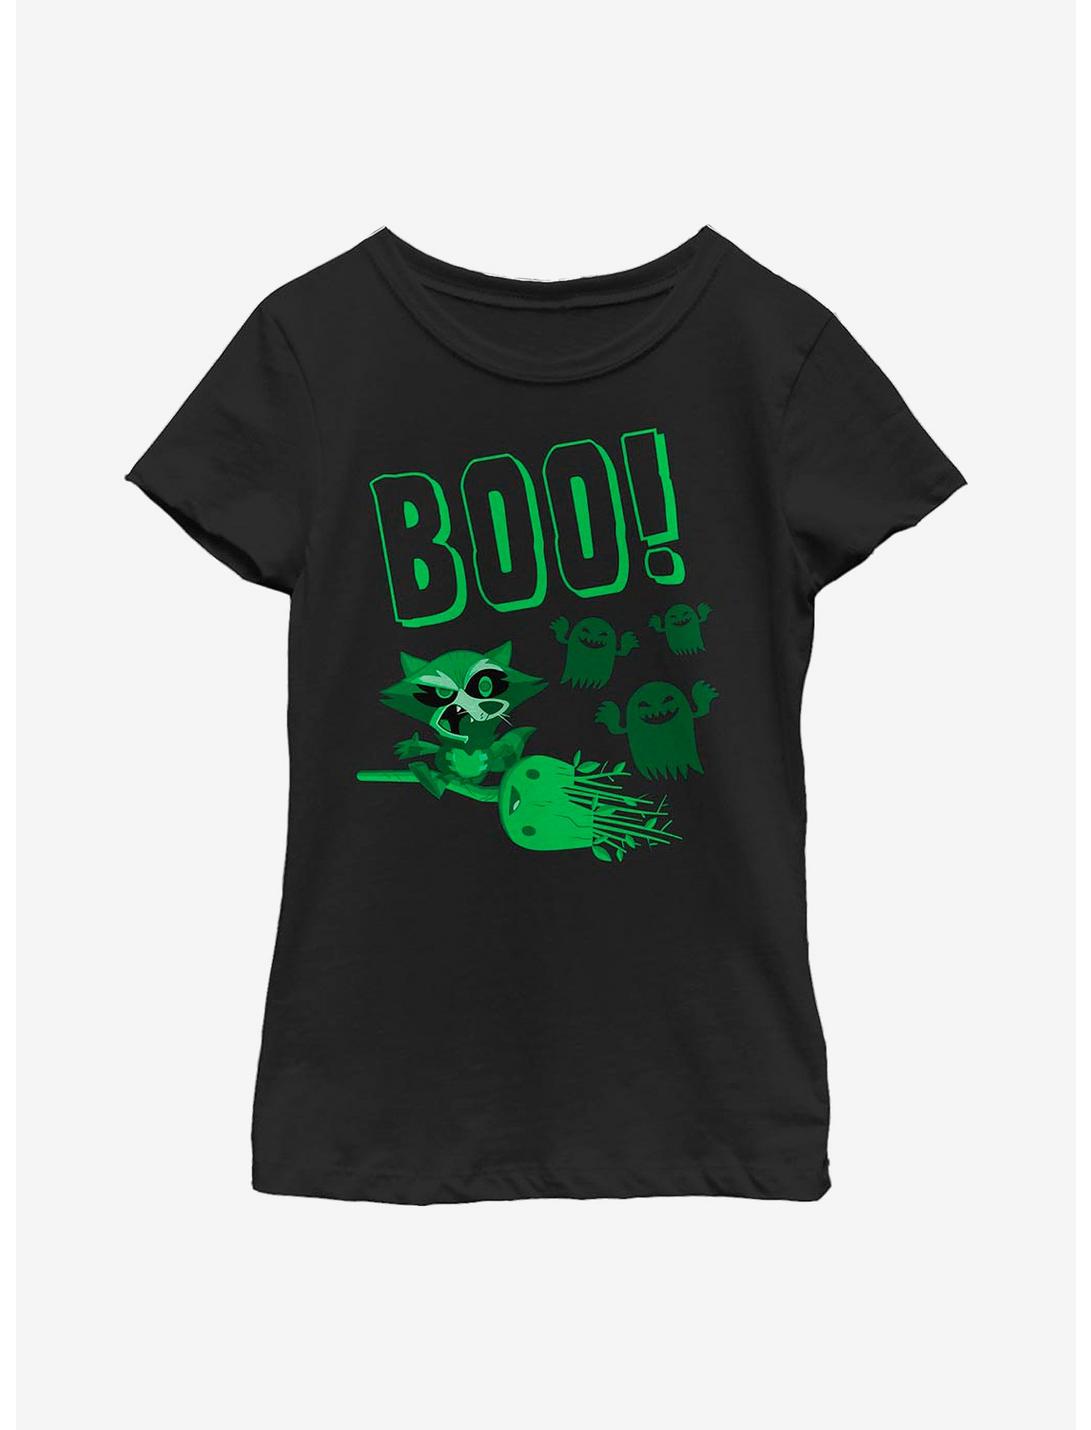 Marvel Guardians Of The Galaxy Boo Rocket Youth Girls T-Shirt, BLACK, hi-res